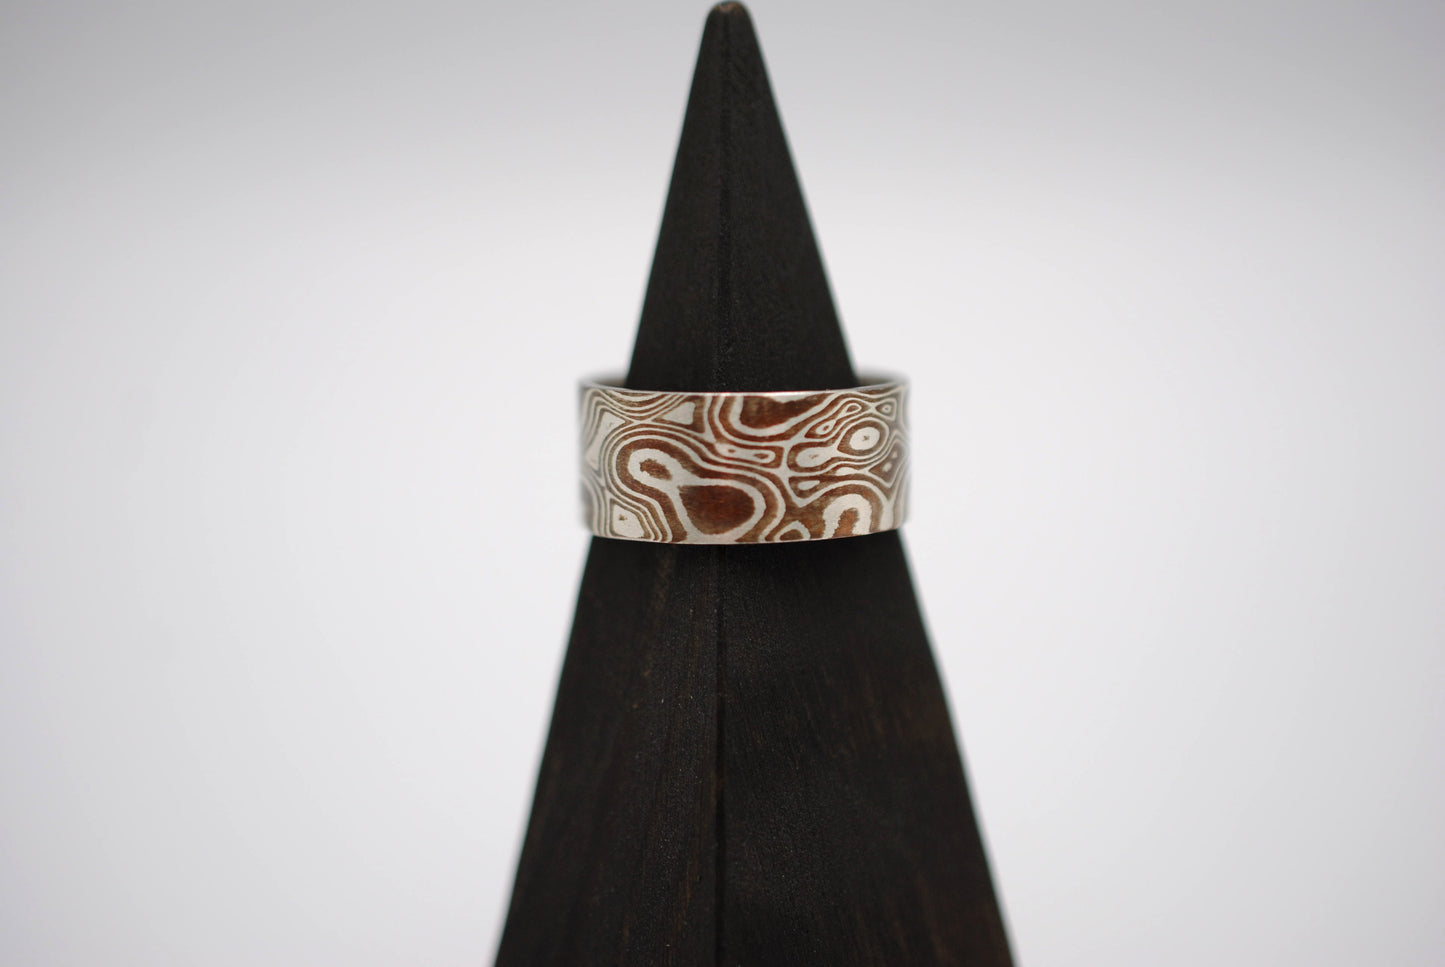 Mokume Gane: Silver and Copper Large Ring